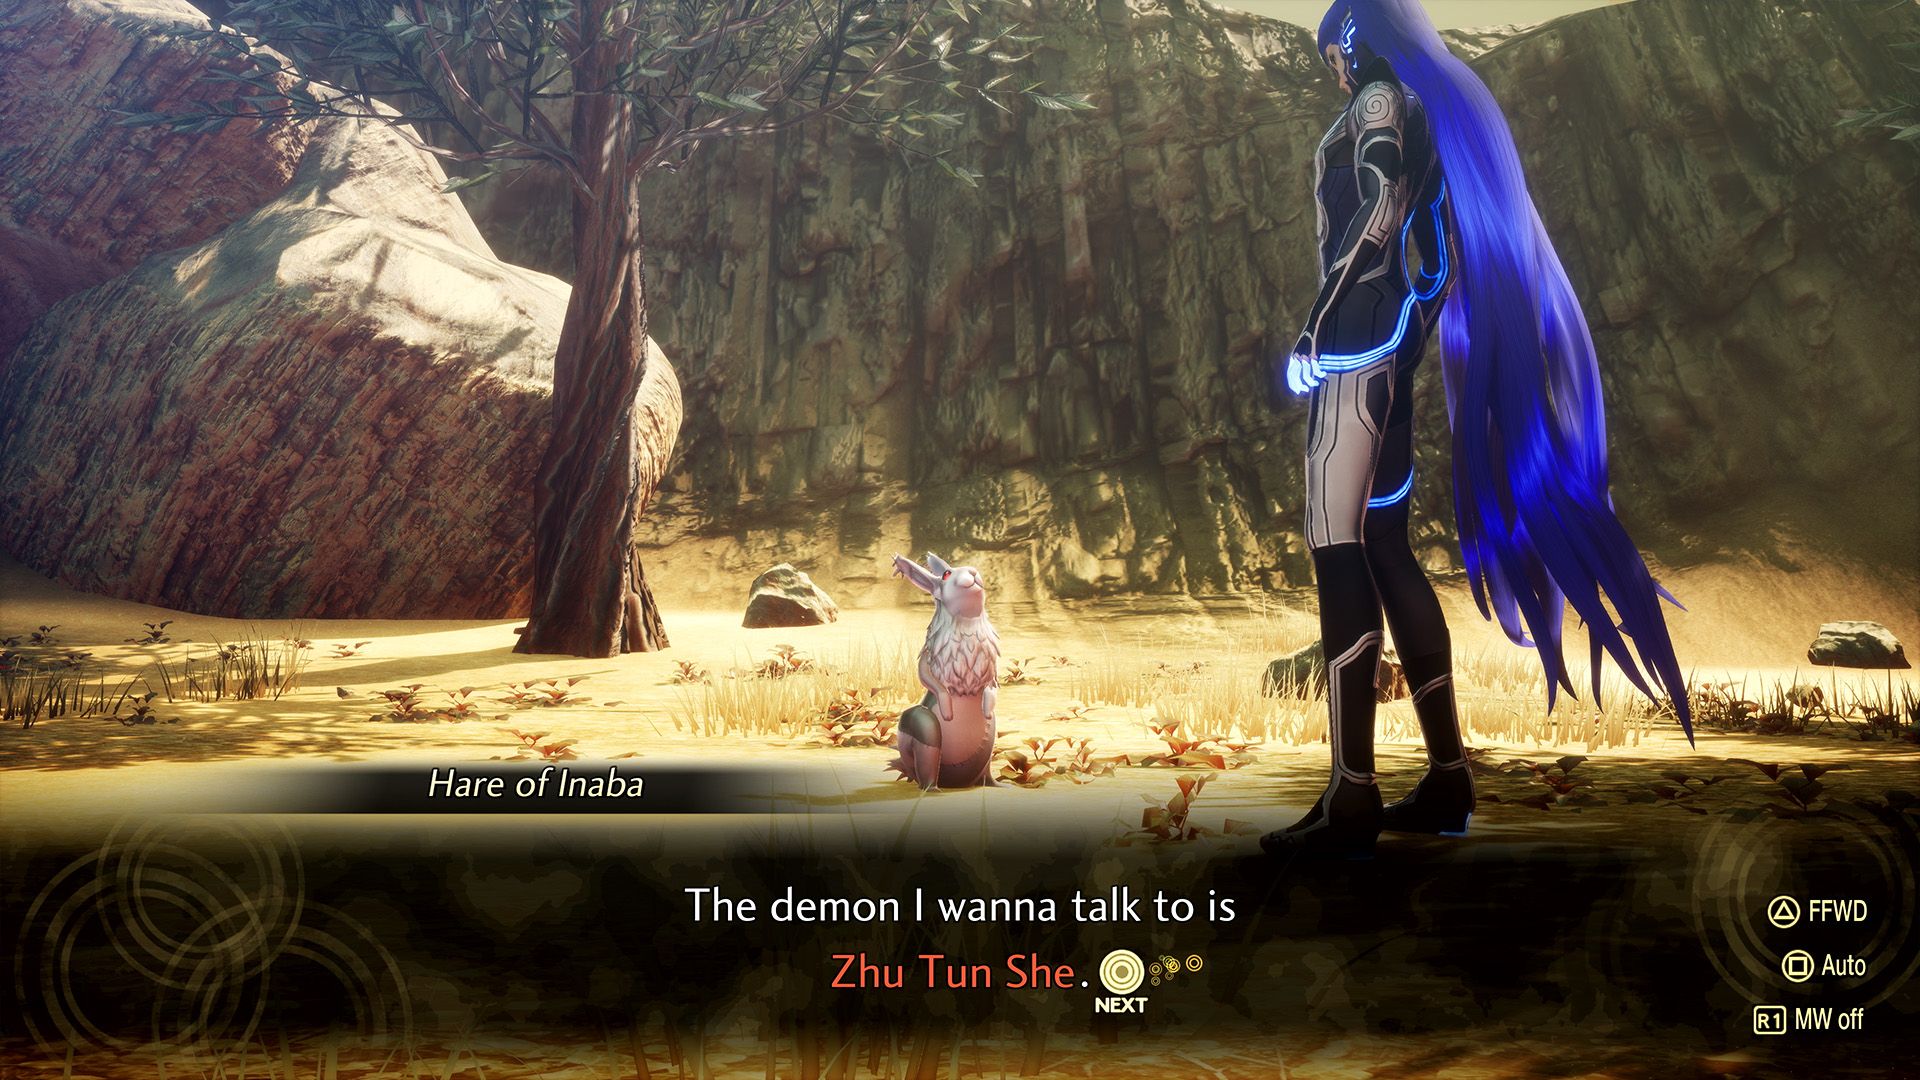 Shin Megami Tensei V: Vengeance Hands-On Preview: "Undeniably Intriguing"